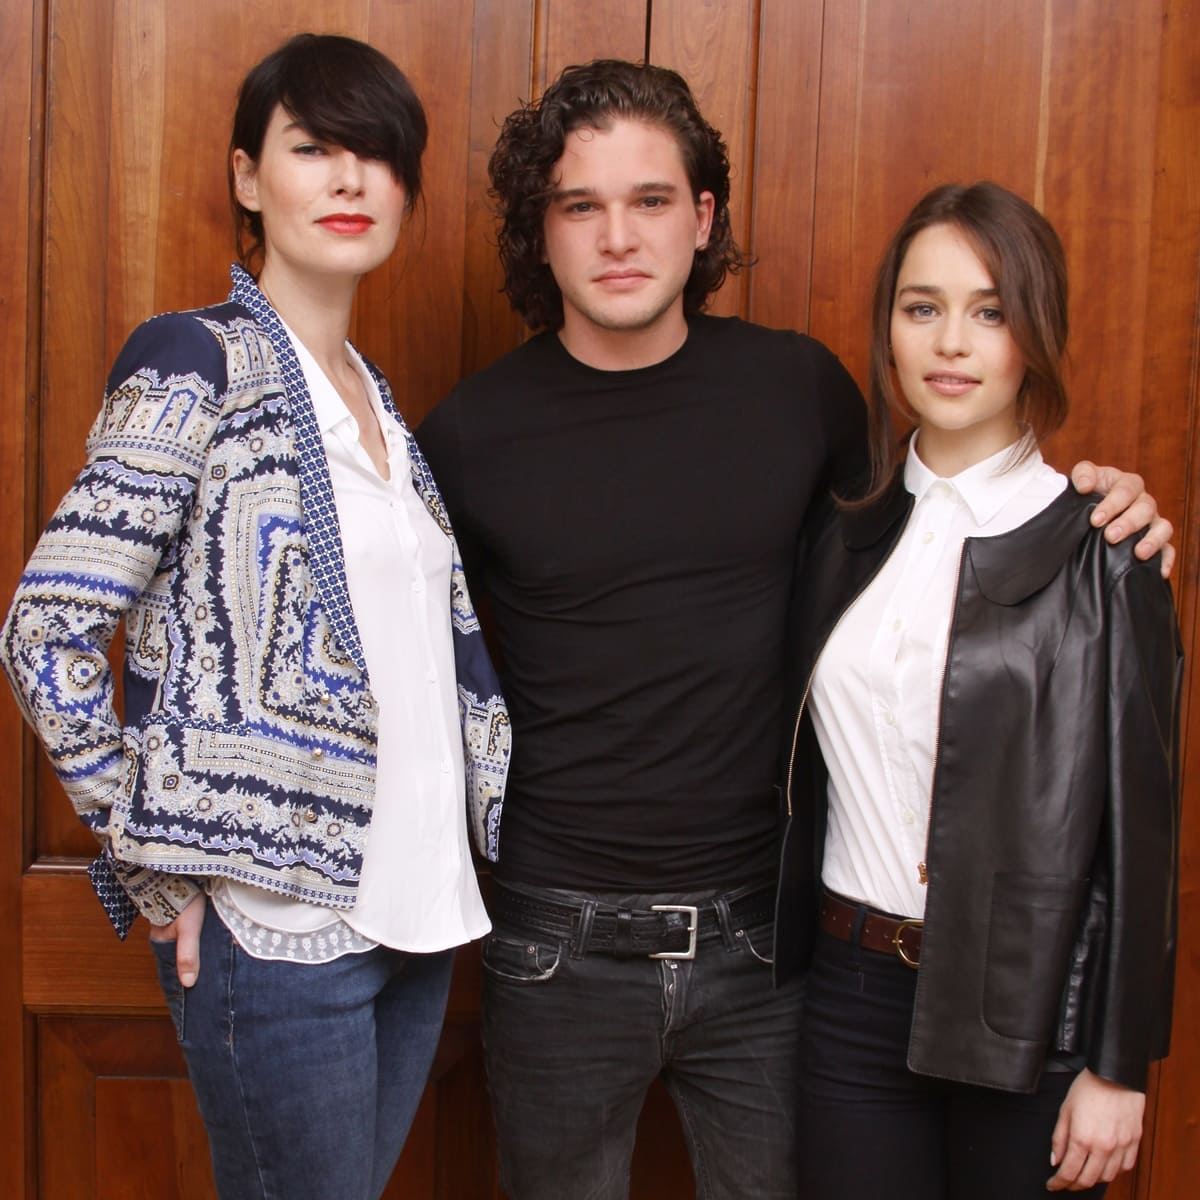 Emilia Clarke (R) looks short standing next to Lena Headey and Kit Harington at the "Game Of Thrones" Press Conference